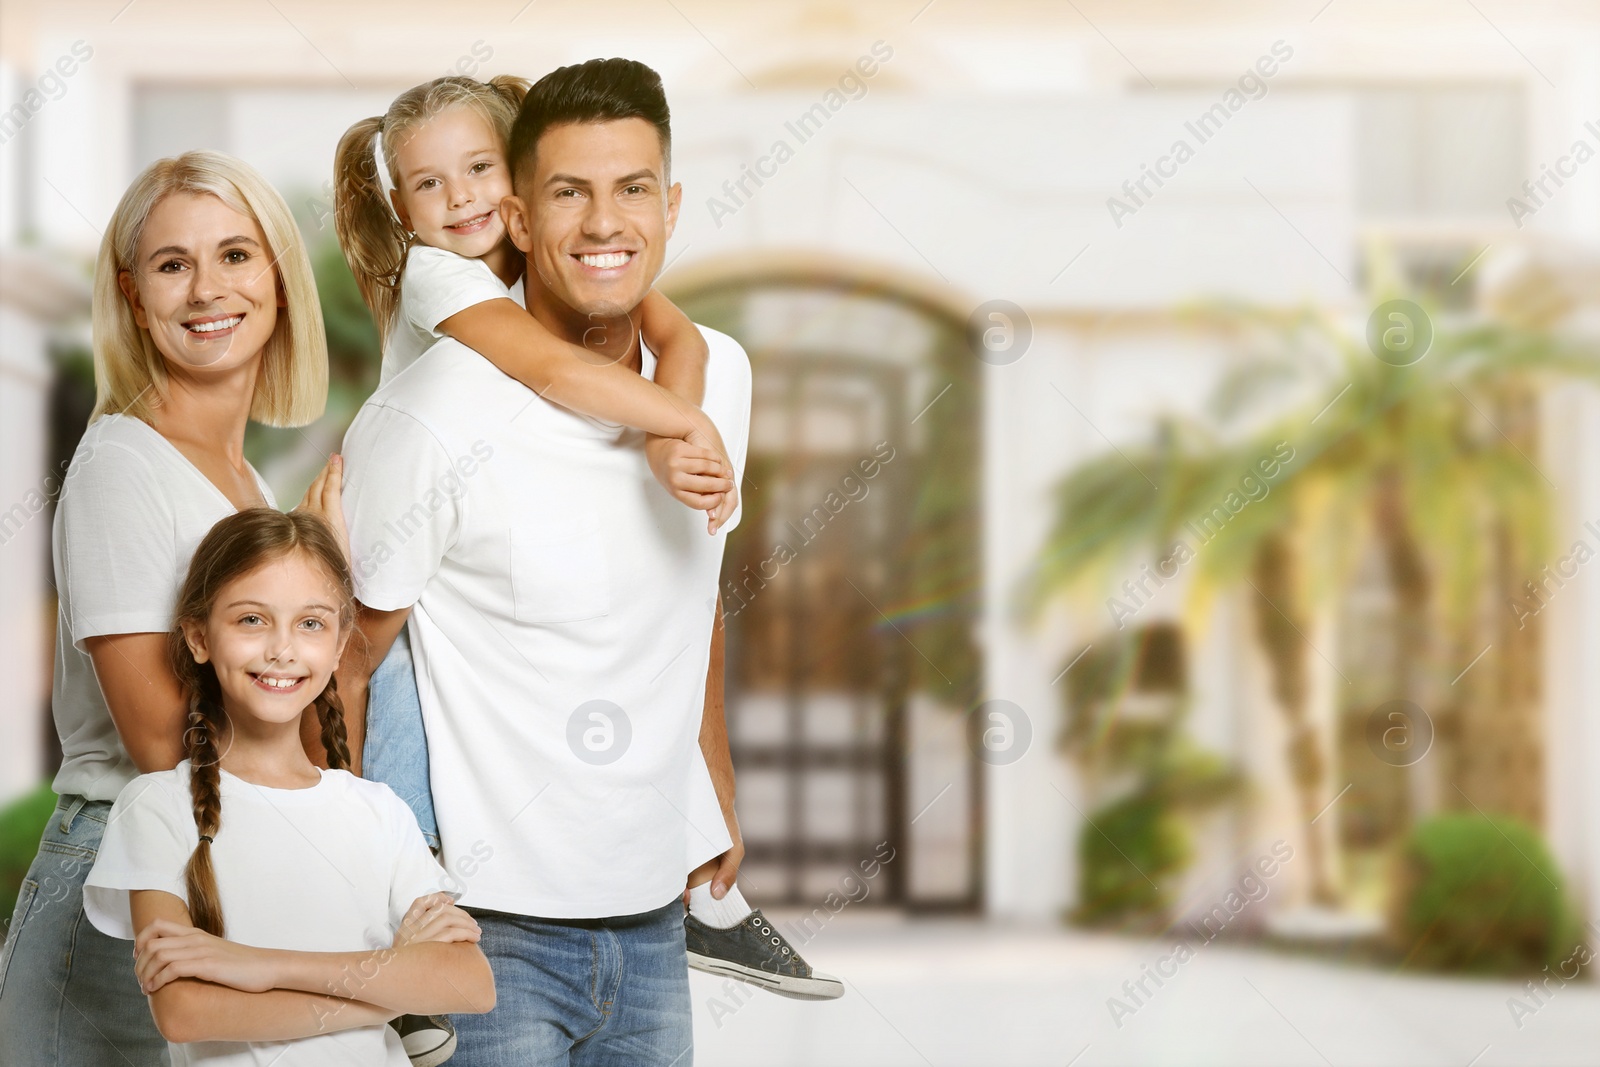 Image of Dream home. Happy family near big beautiful house. Space for text